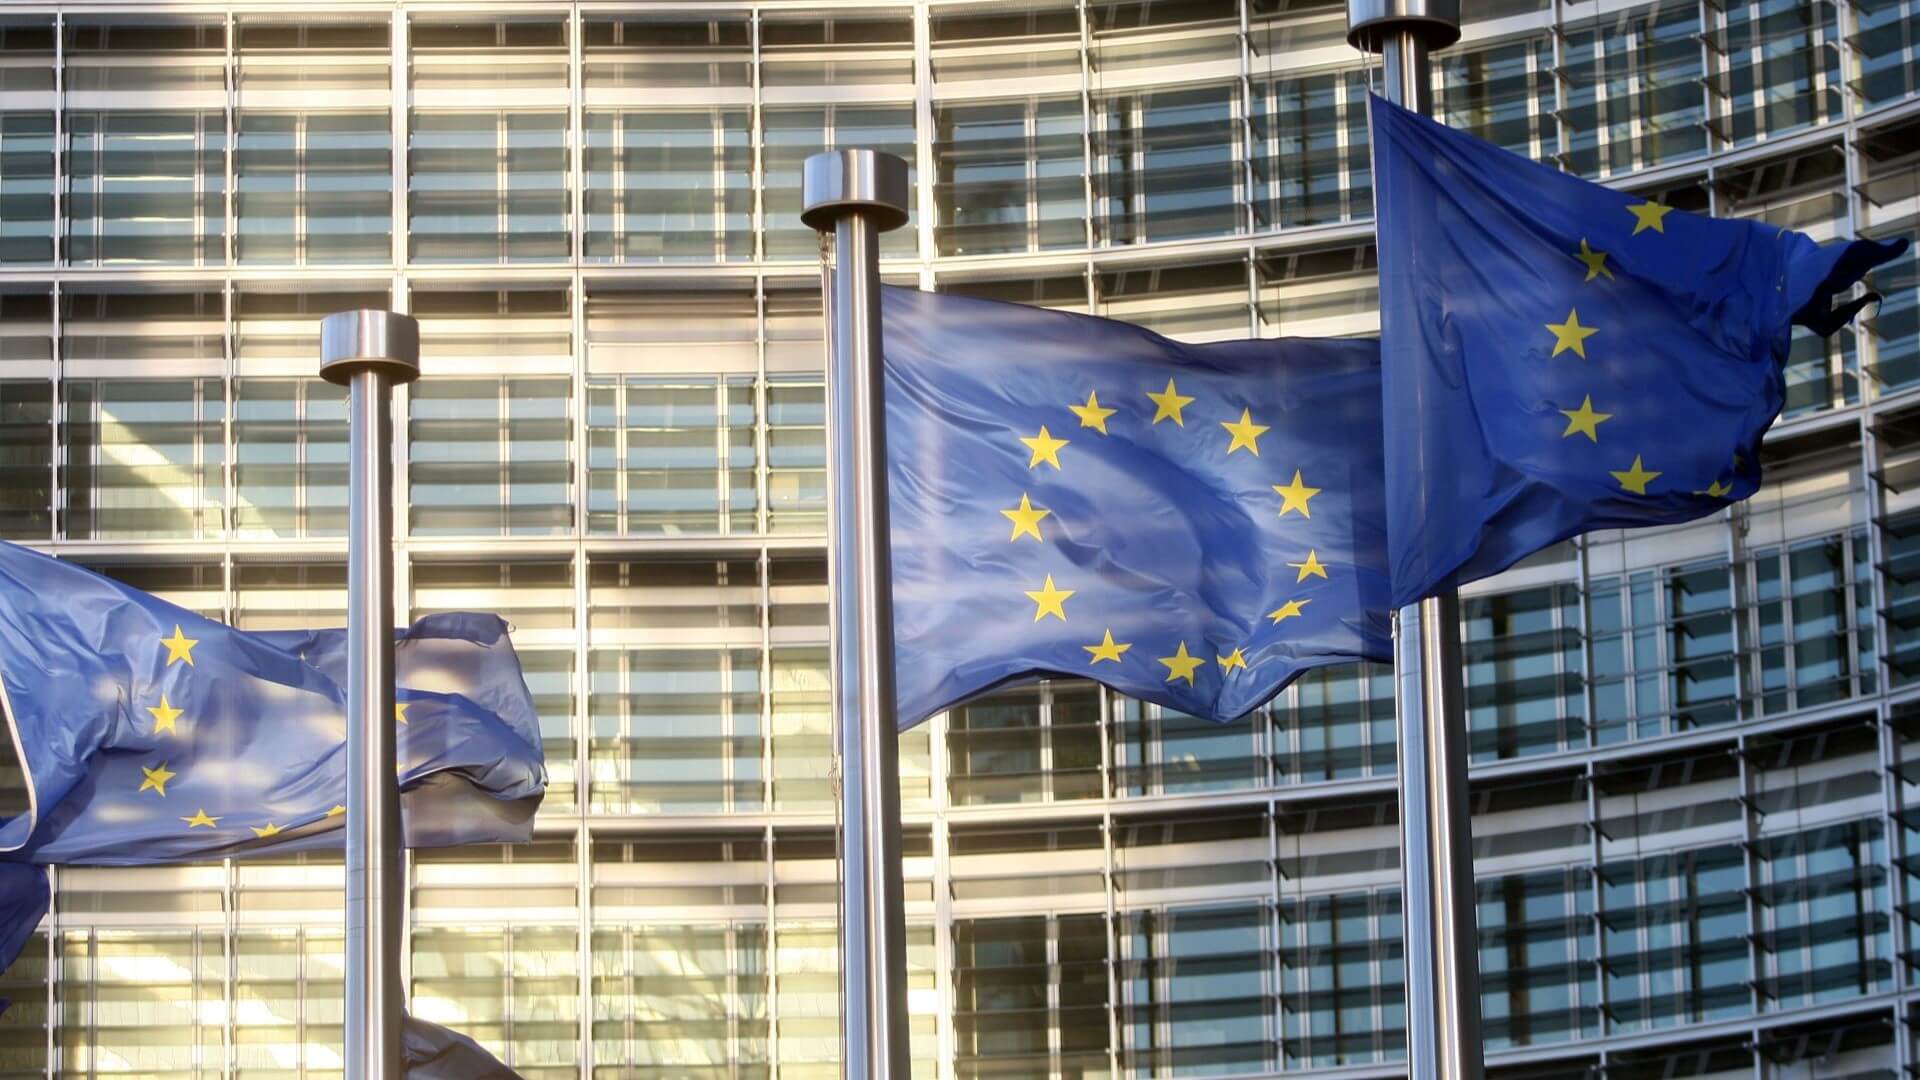 European Commission flags flying outside building